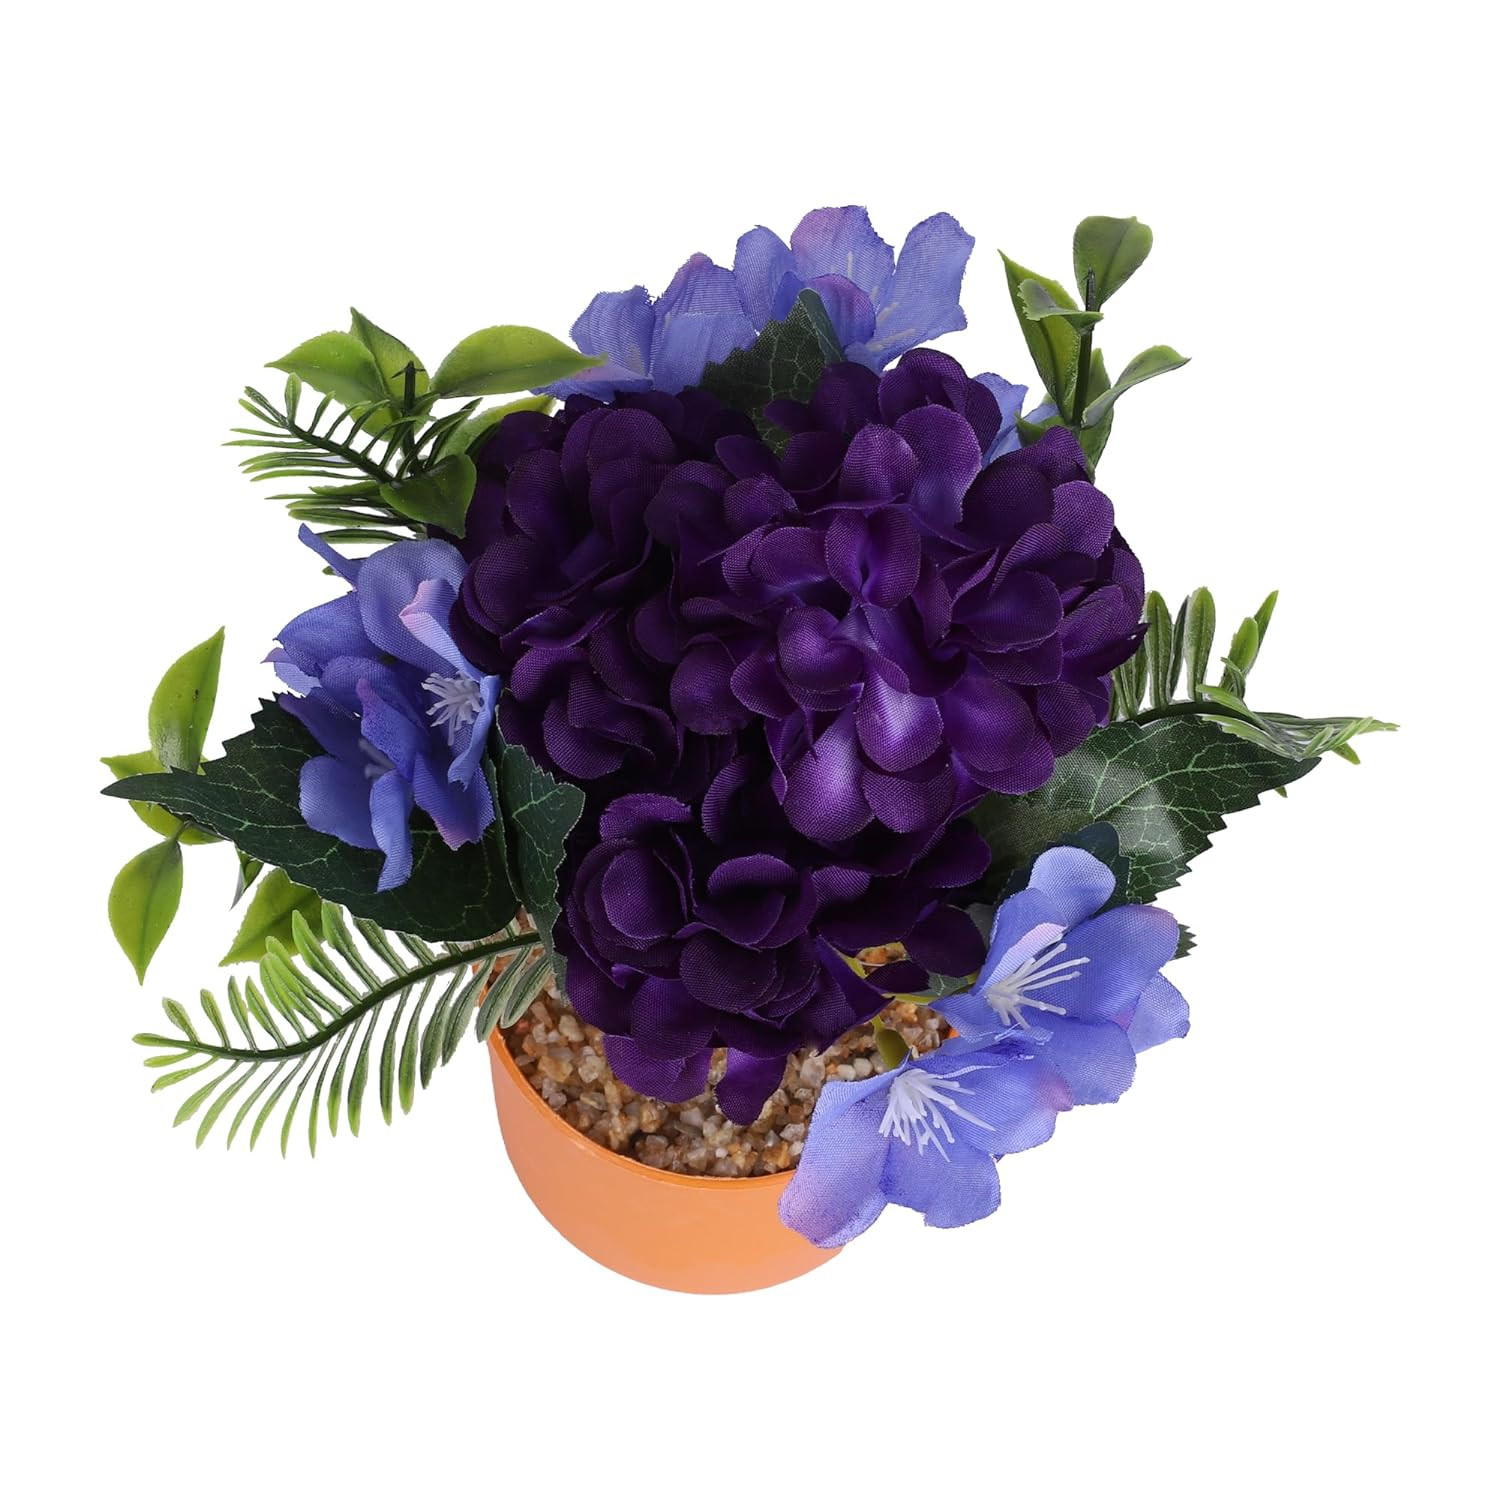 Kuber Industries Artificial Plants for Home DÃ©cor|Natural Looking Indoor Fake Plants with Pot|Artificial Flowers for Decoration (Purple)